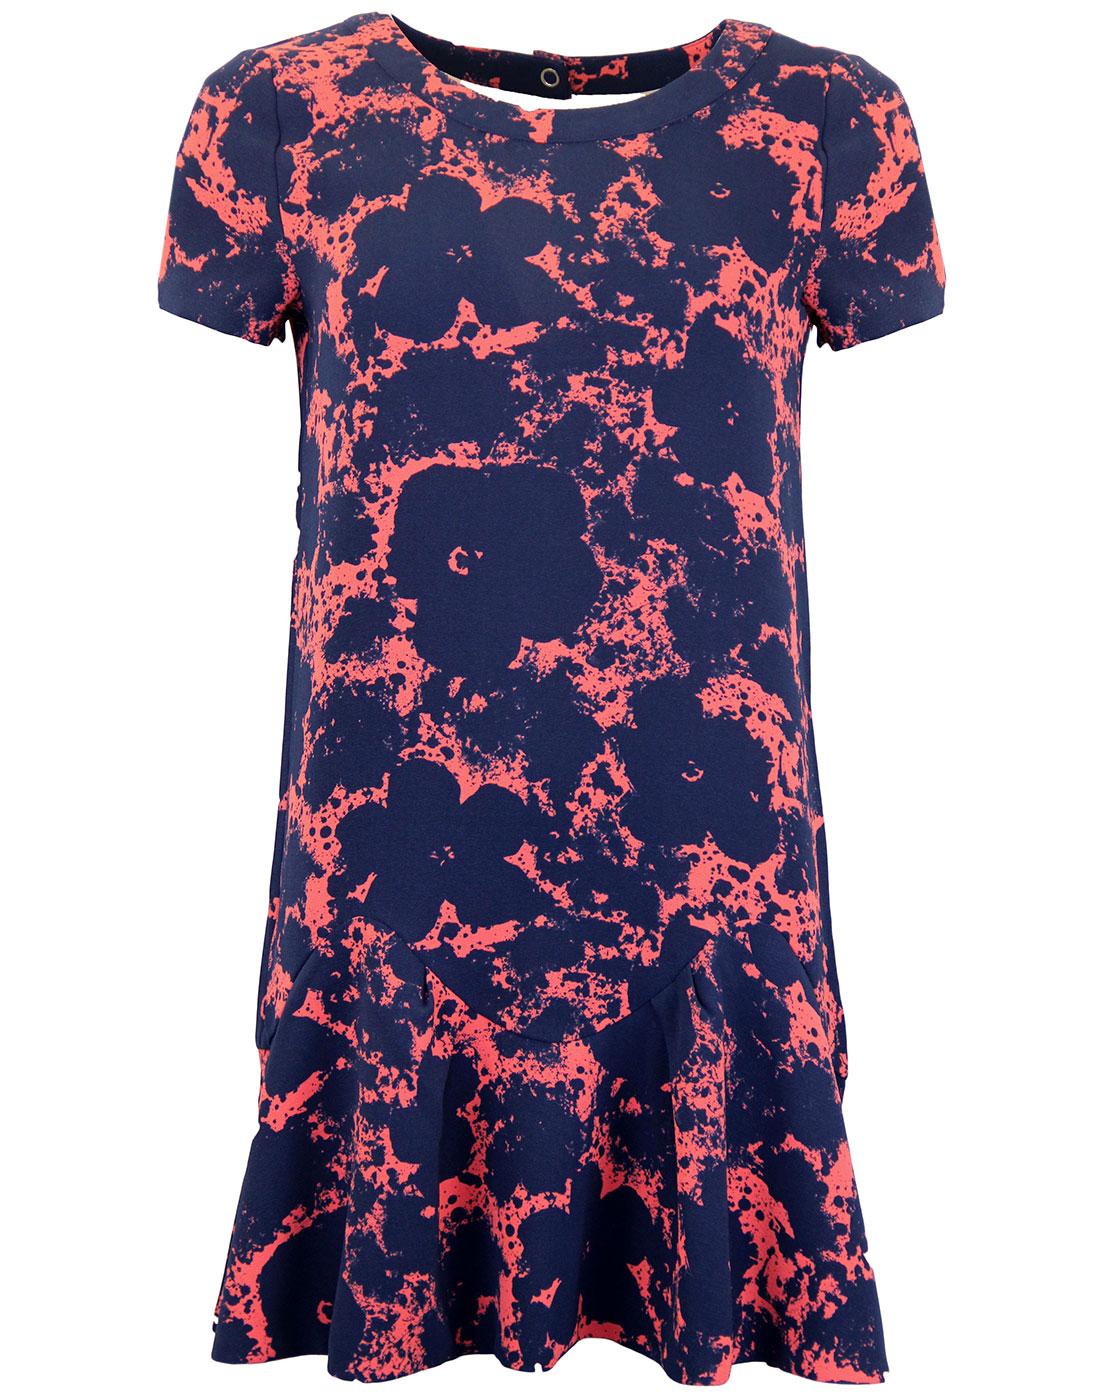 ANY WARHOL By PEPE JEANS Astoria Retro 1960s Floral Print Dress